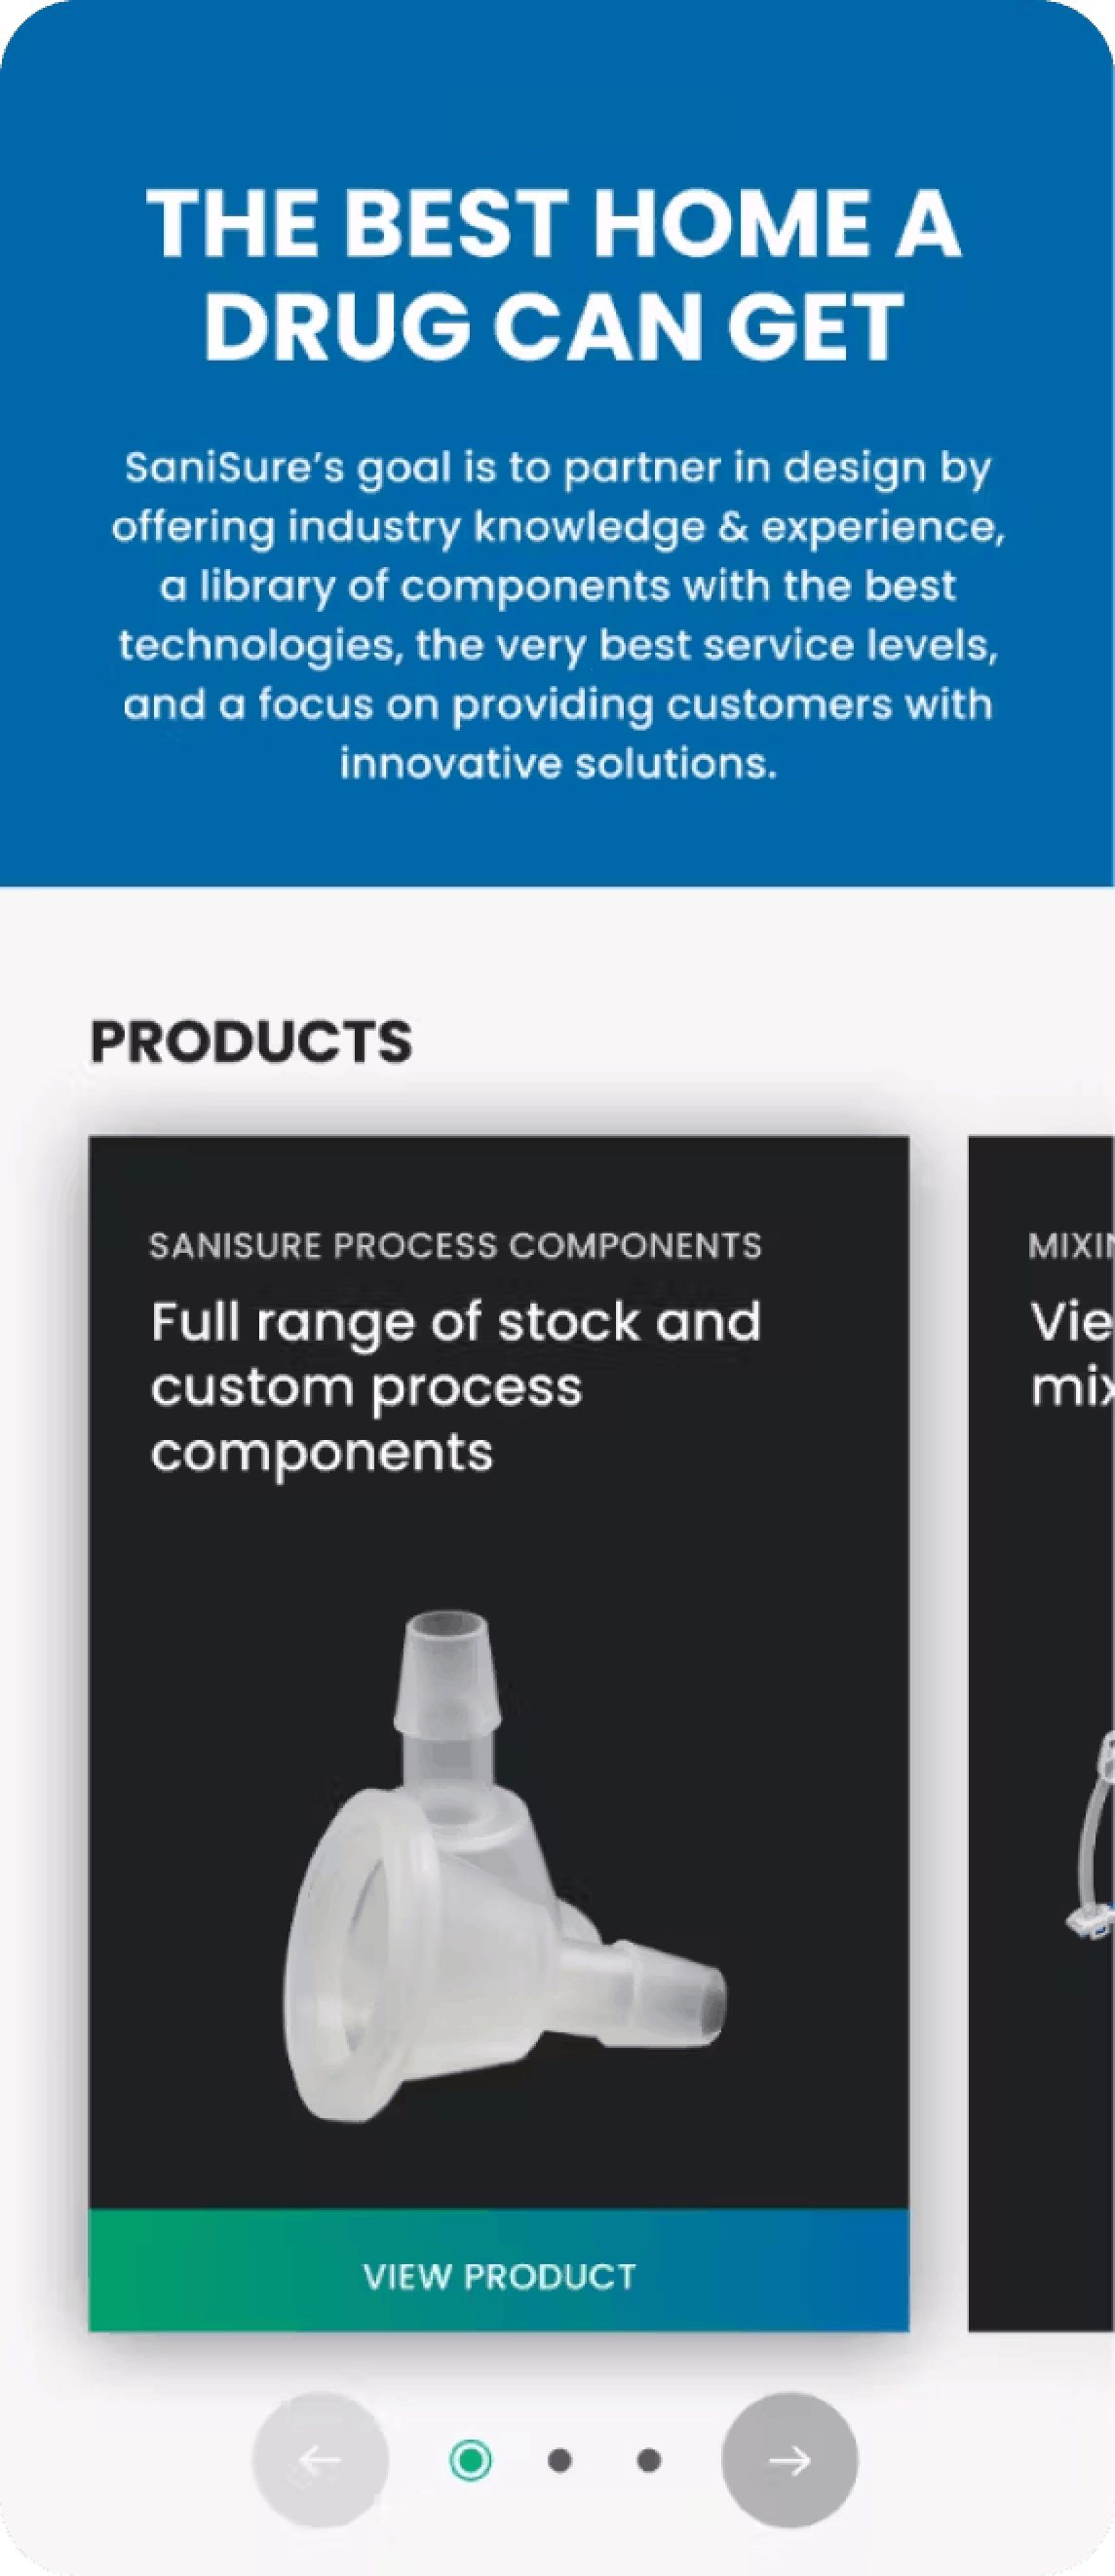 A product listing page on the Sanisure website.